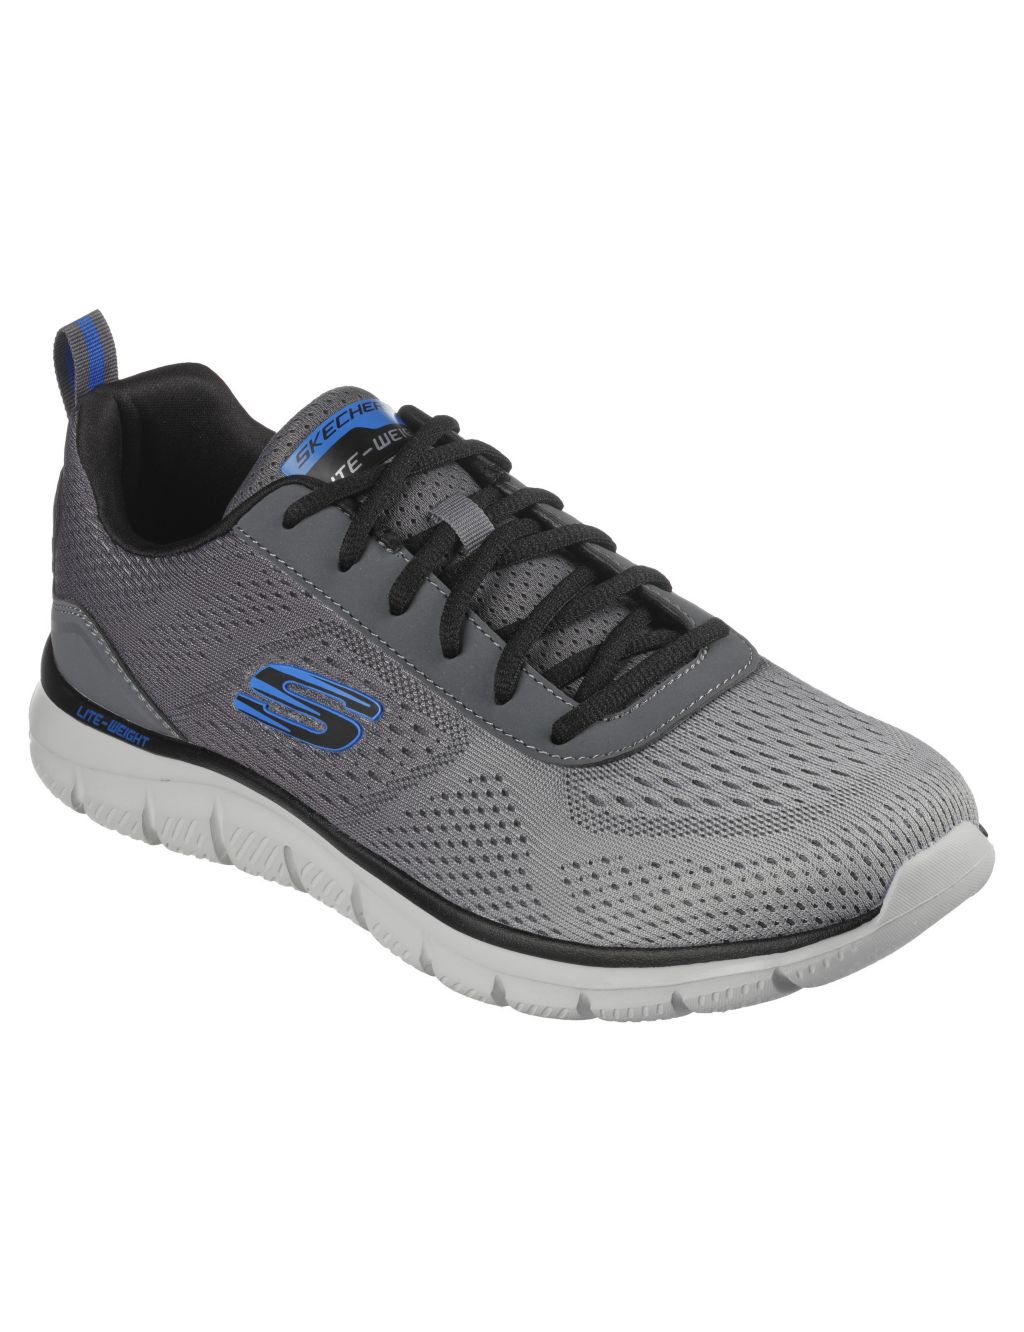 Track Ripkent Lace Up Trainers image 2